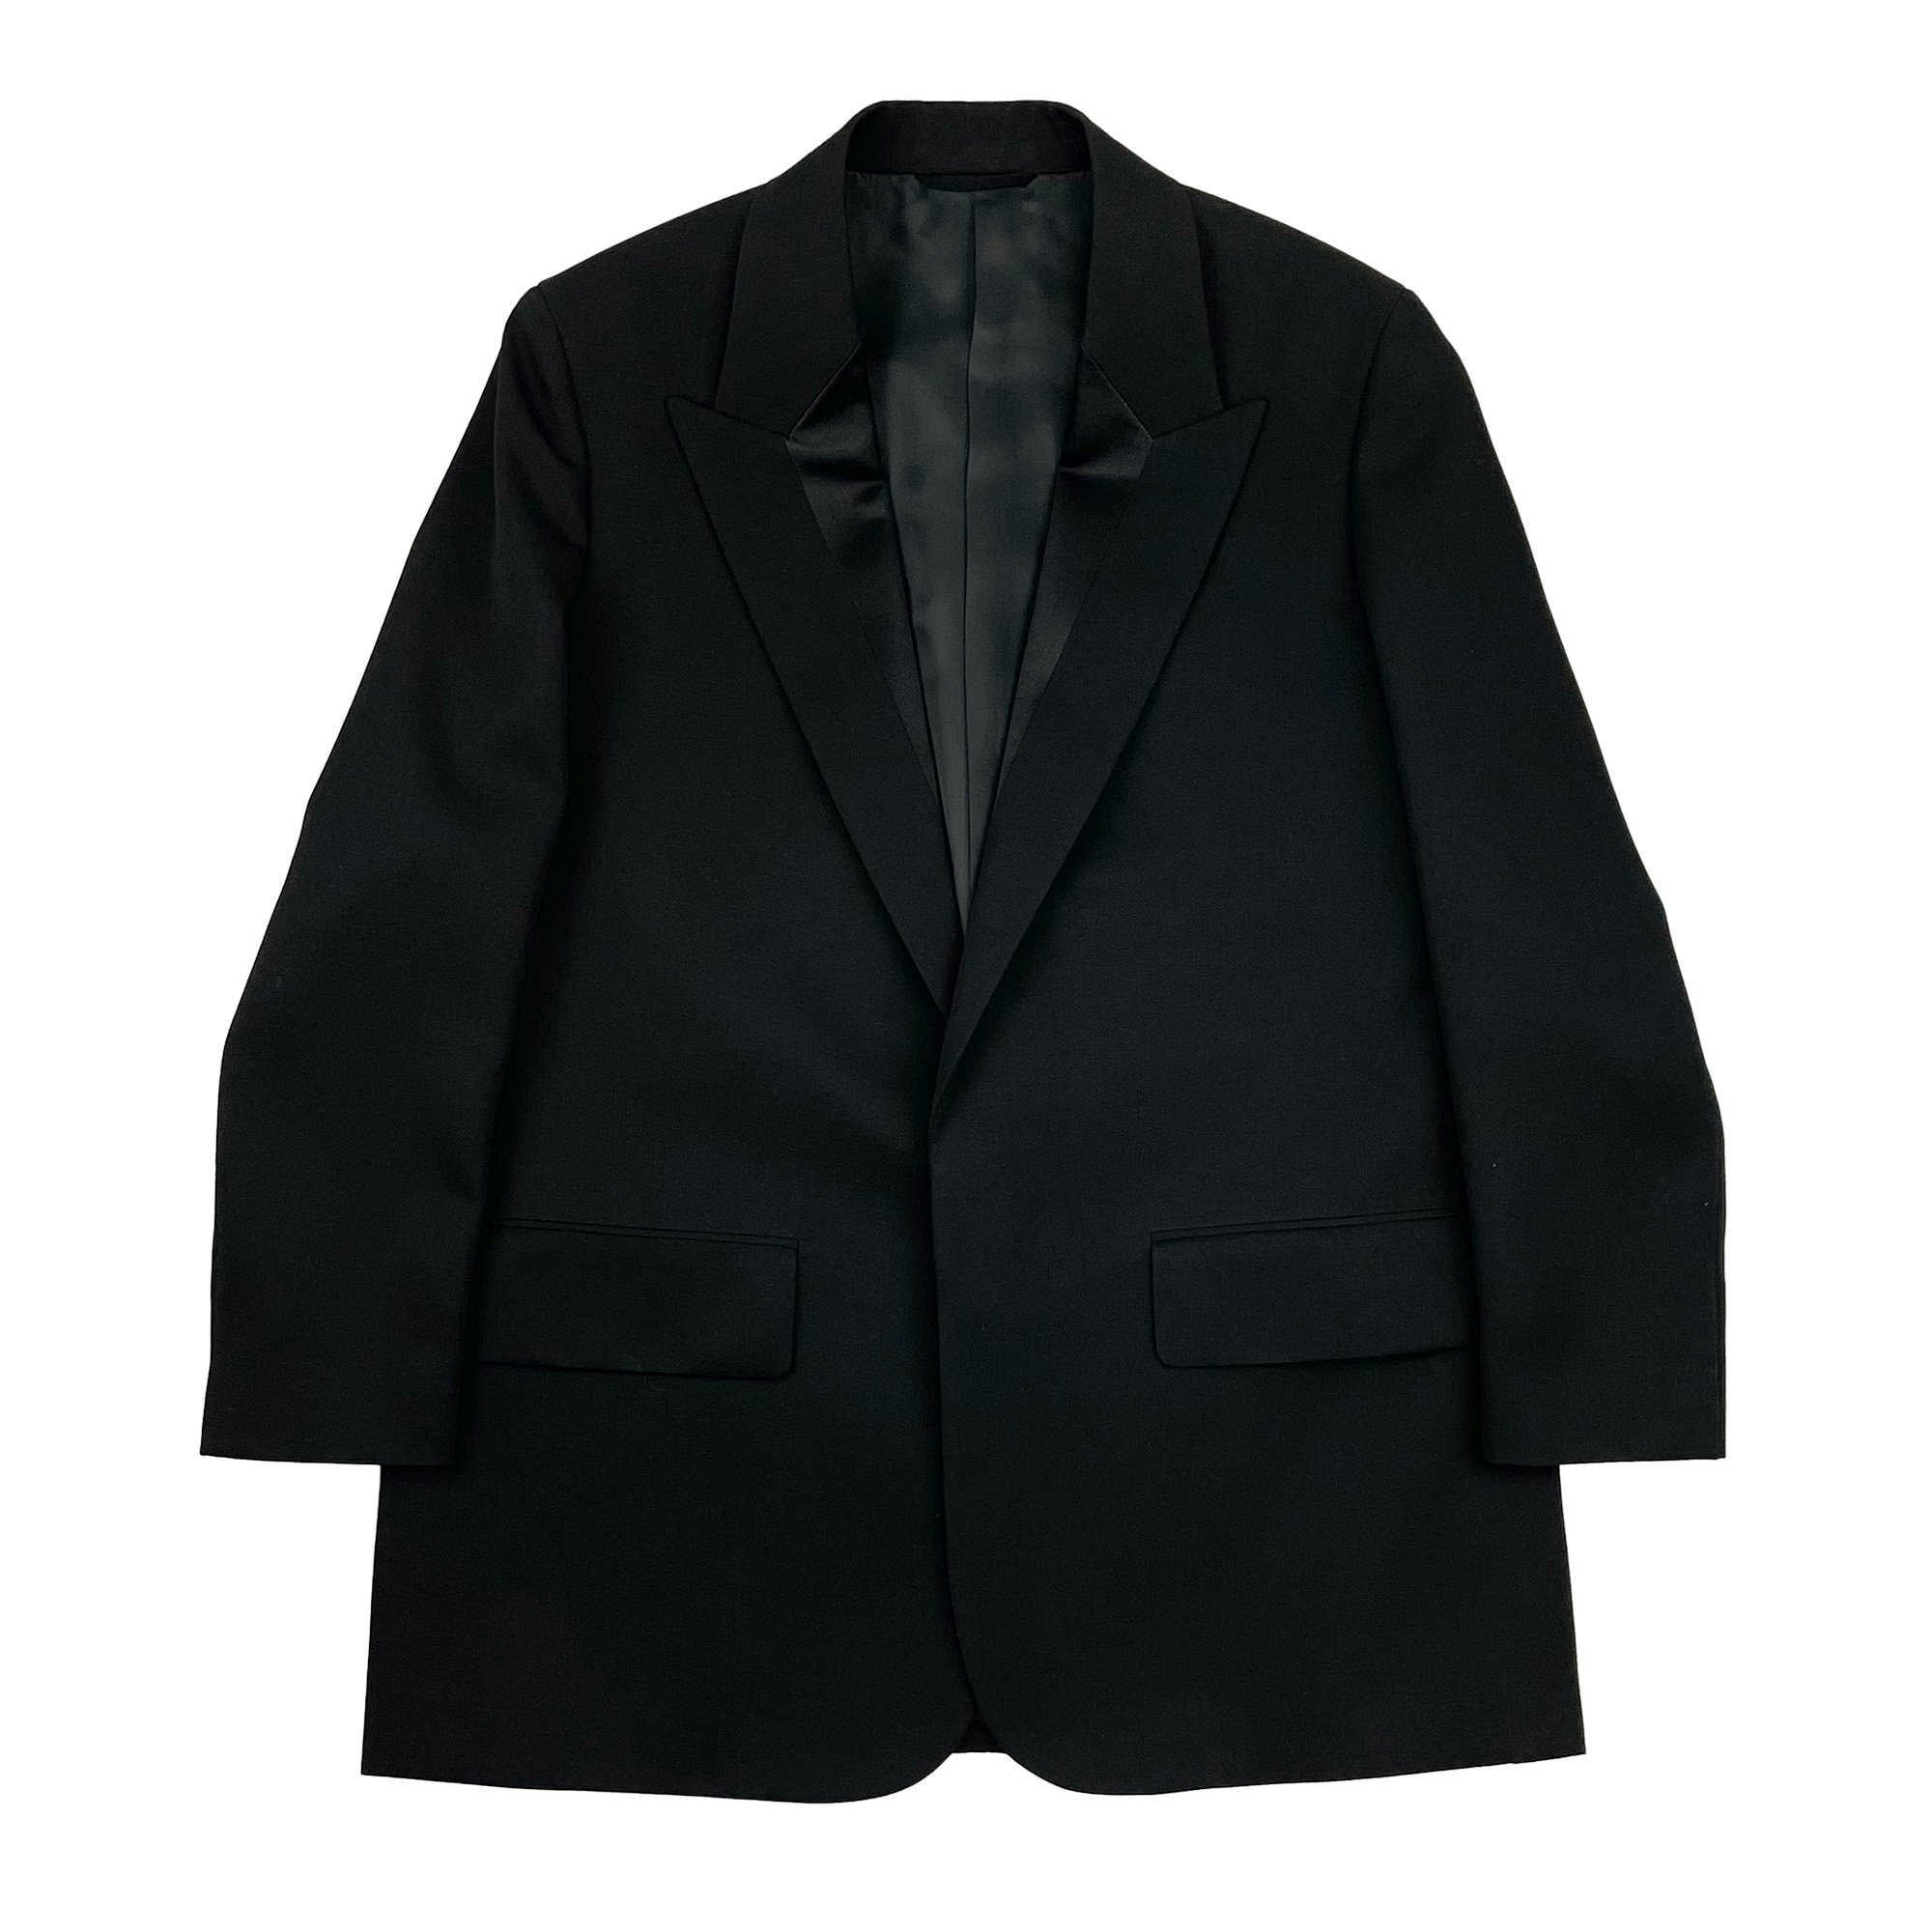 <img class='new_mark_img1' src='https://img.shop-pro.jp/img/new/icons7.gif' style='border:none;display:inline;margin:0px;padding:0px;width:auto;' />THE RERACS SUPER TWILL S+S THE TUXEDO